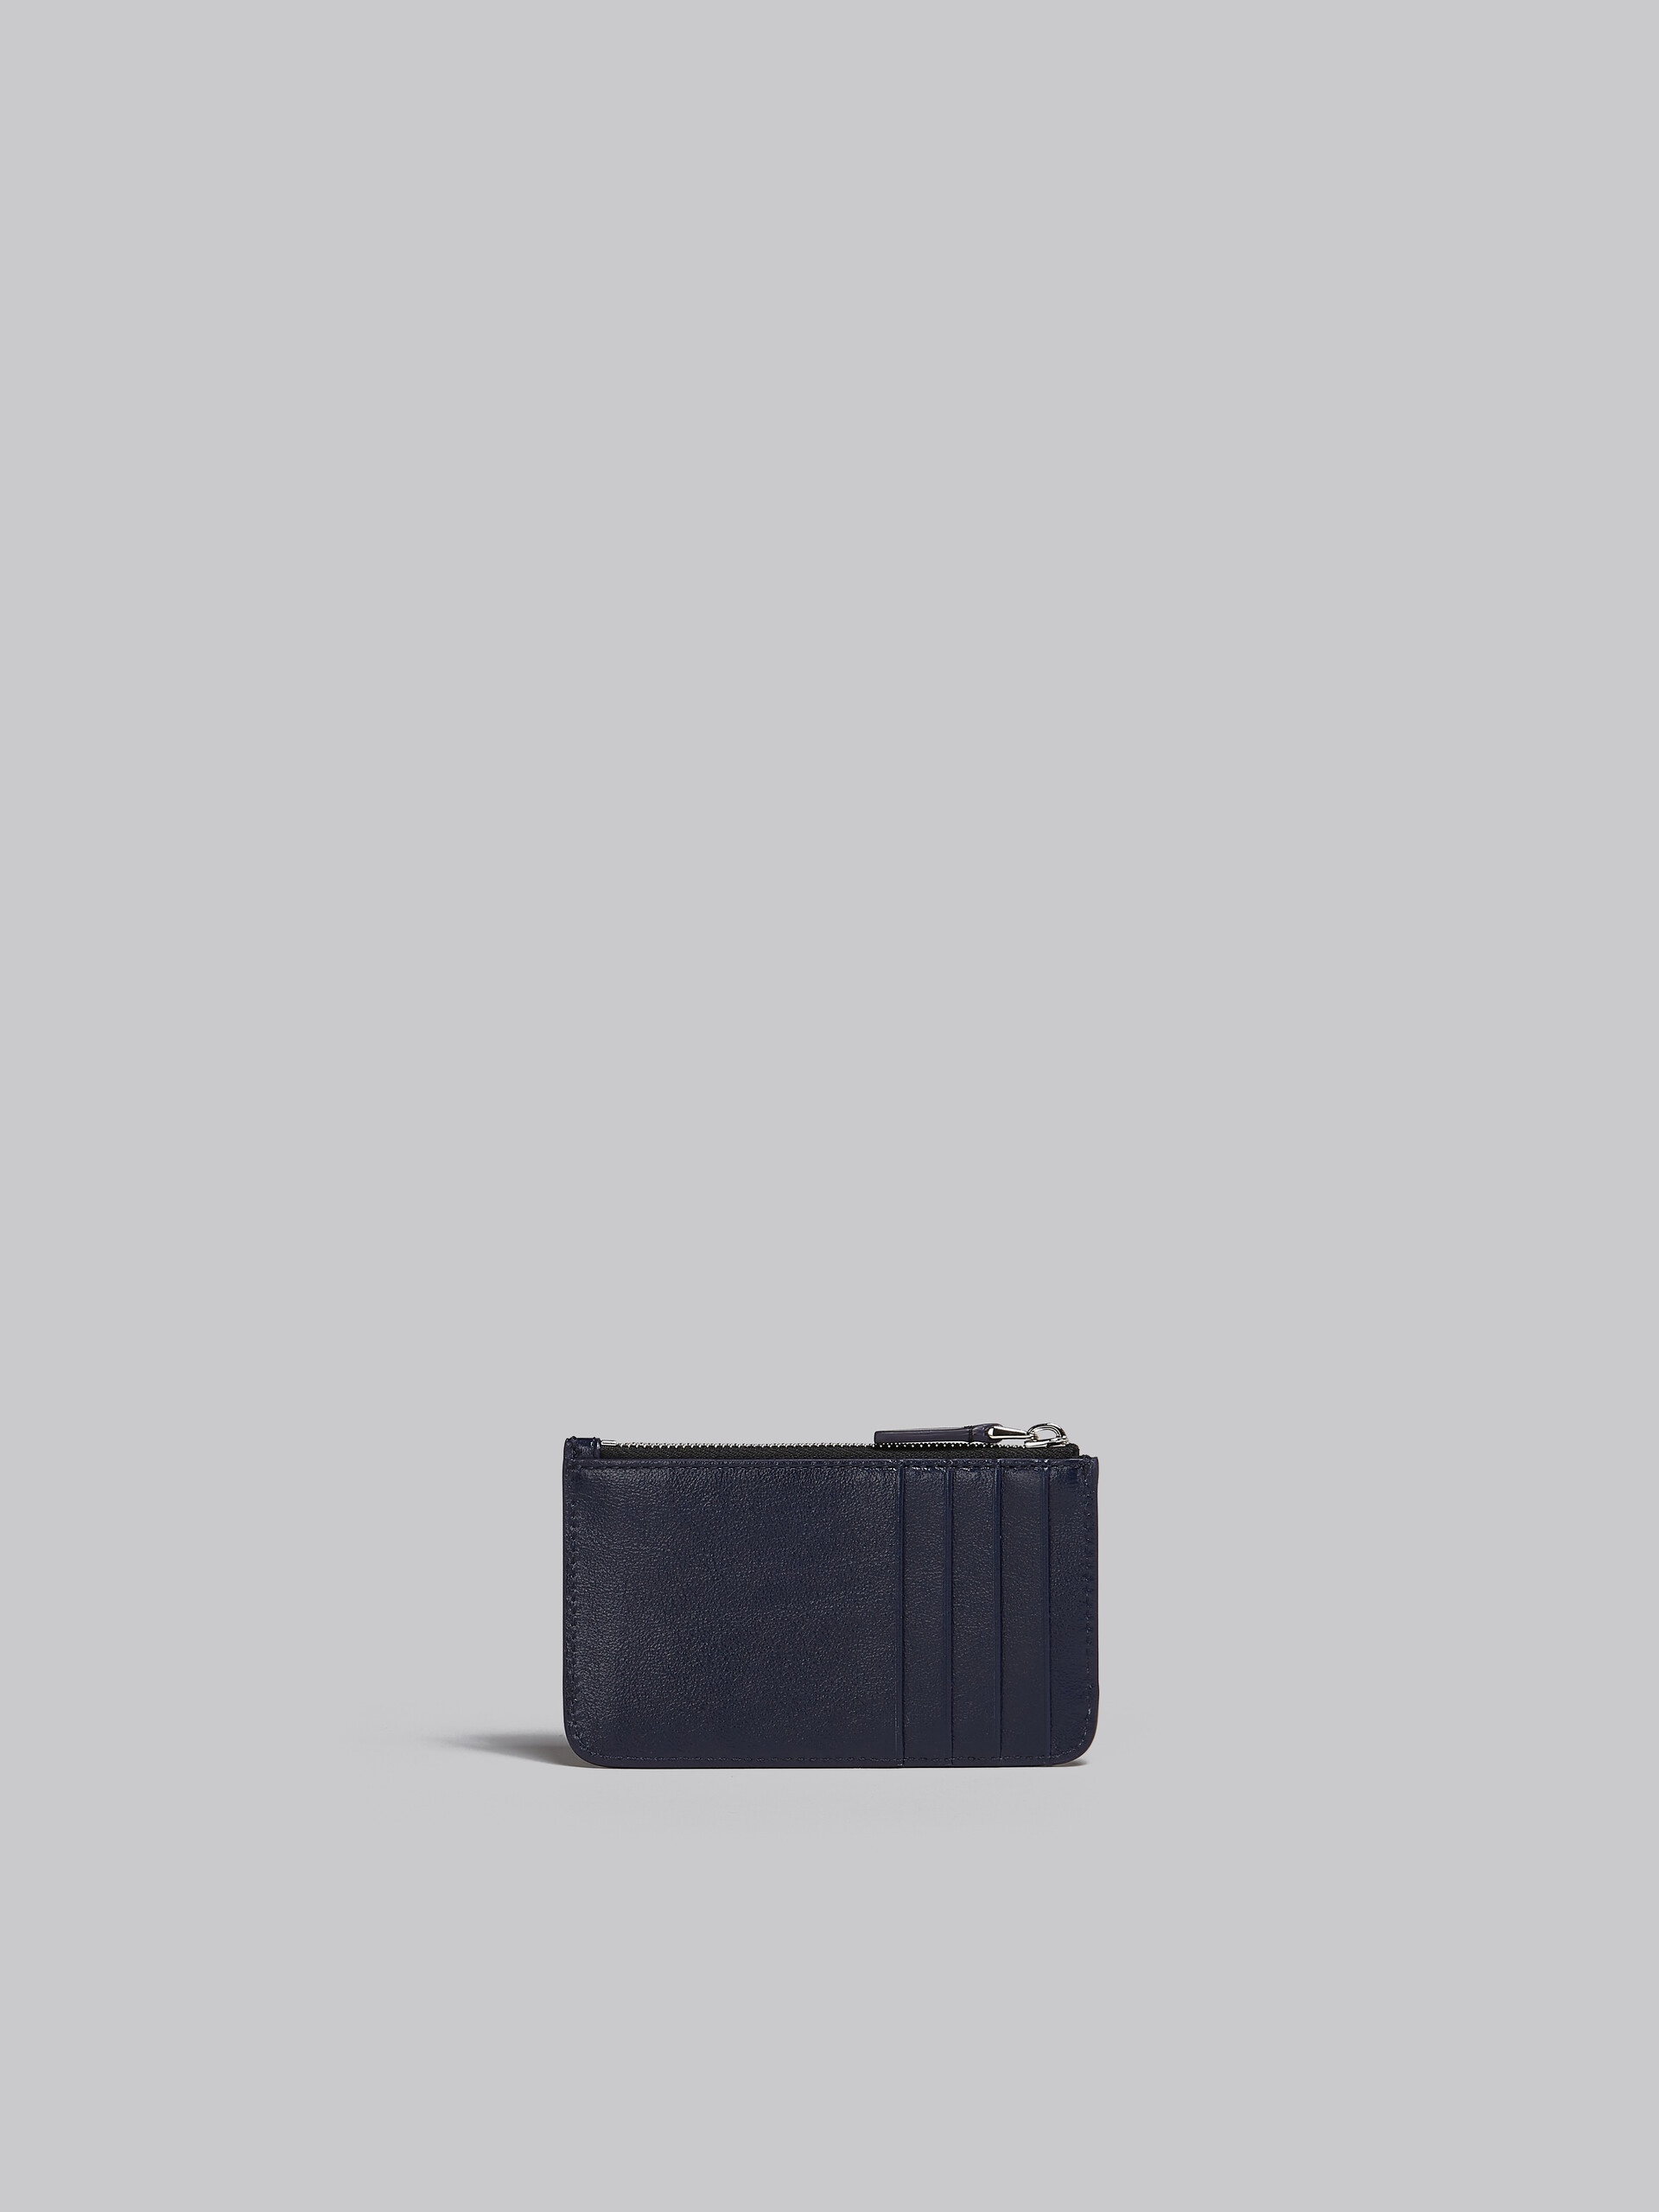 NAVY BLUE AND BLACK LEATHER CARD CASE - 3